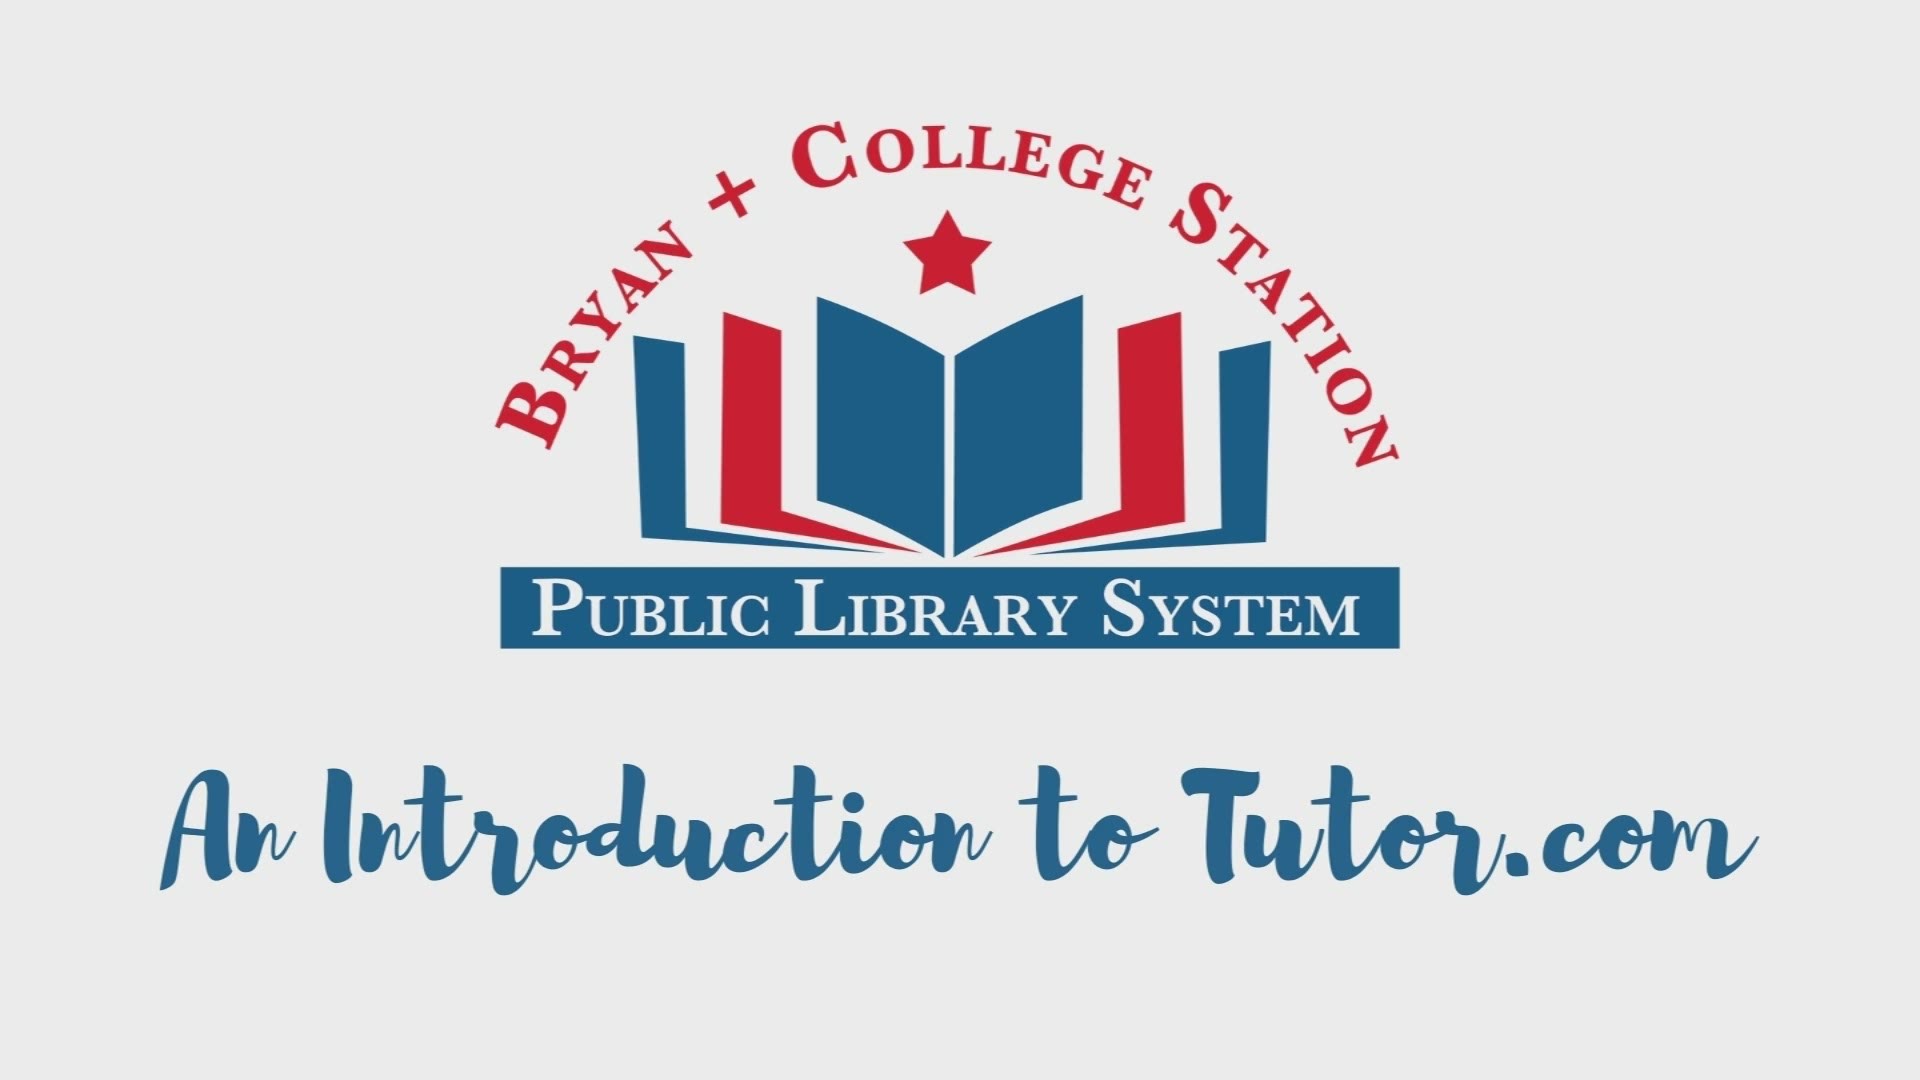 Tutor.com is a free, online resources for students of all walks of life. All you need is a library card.